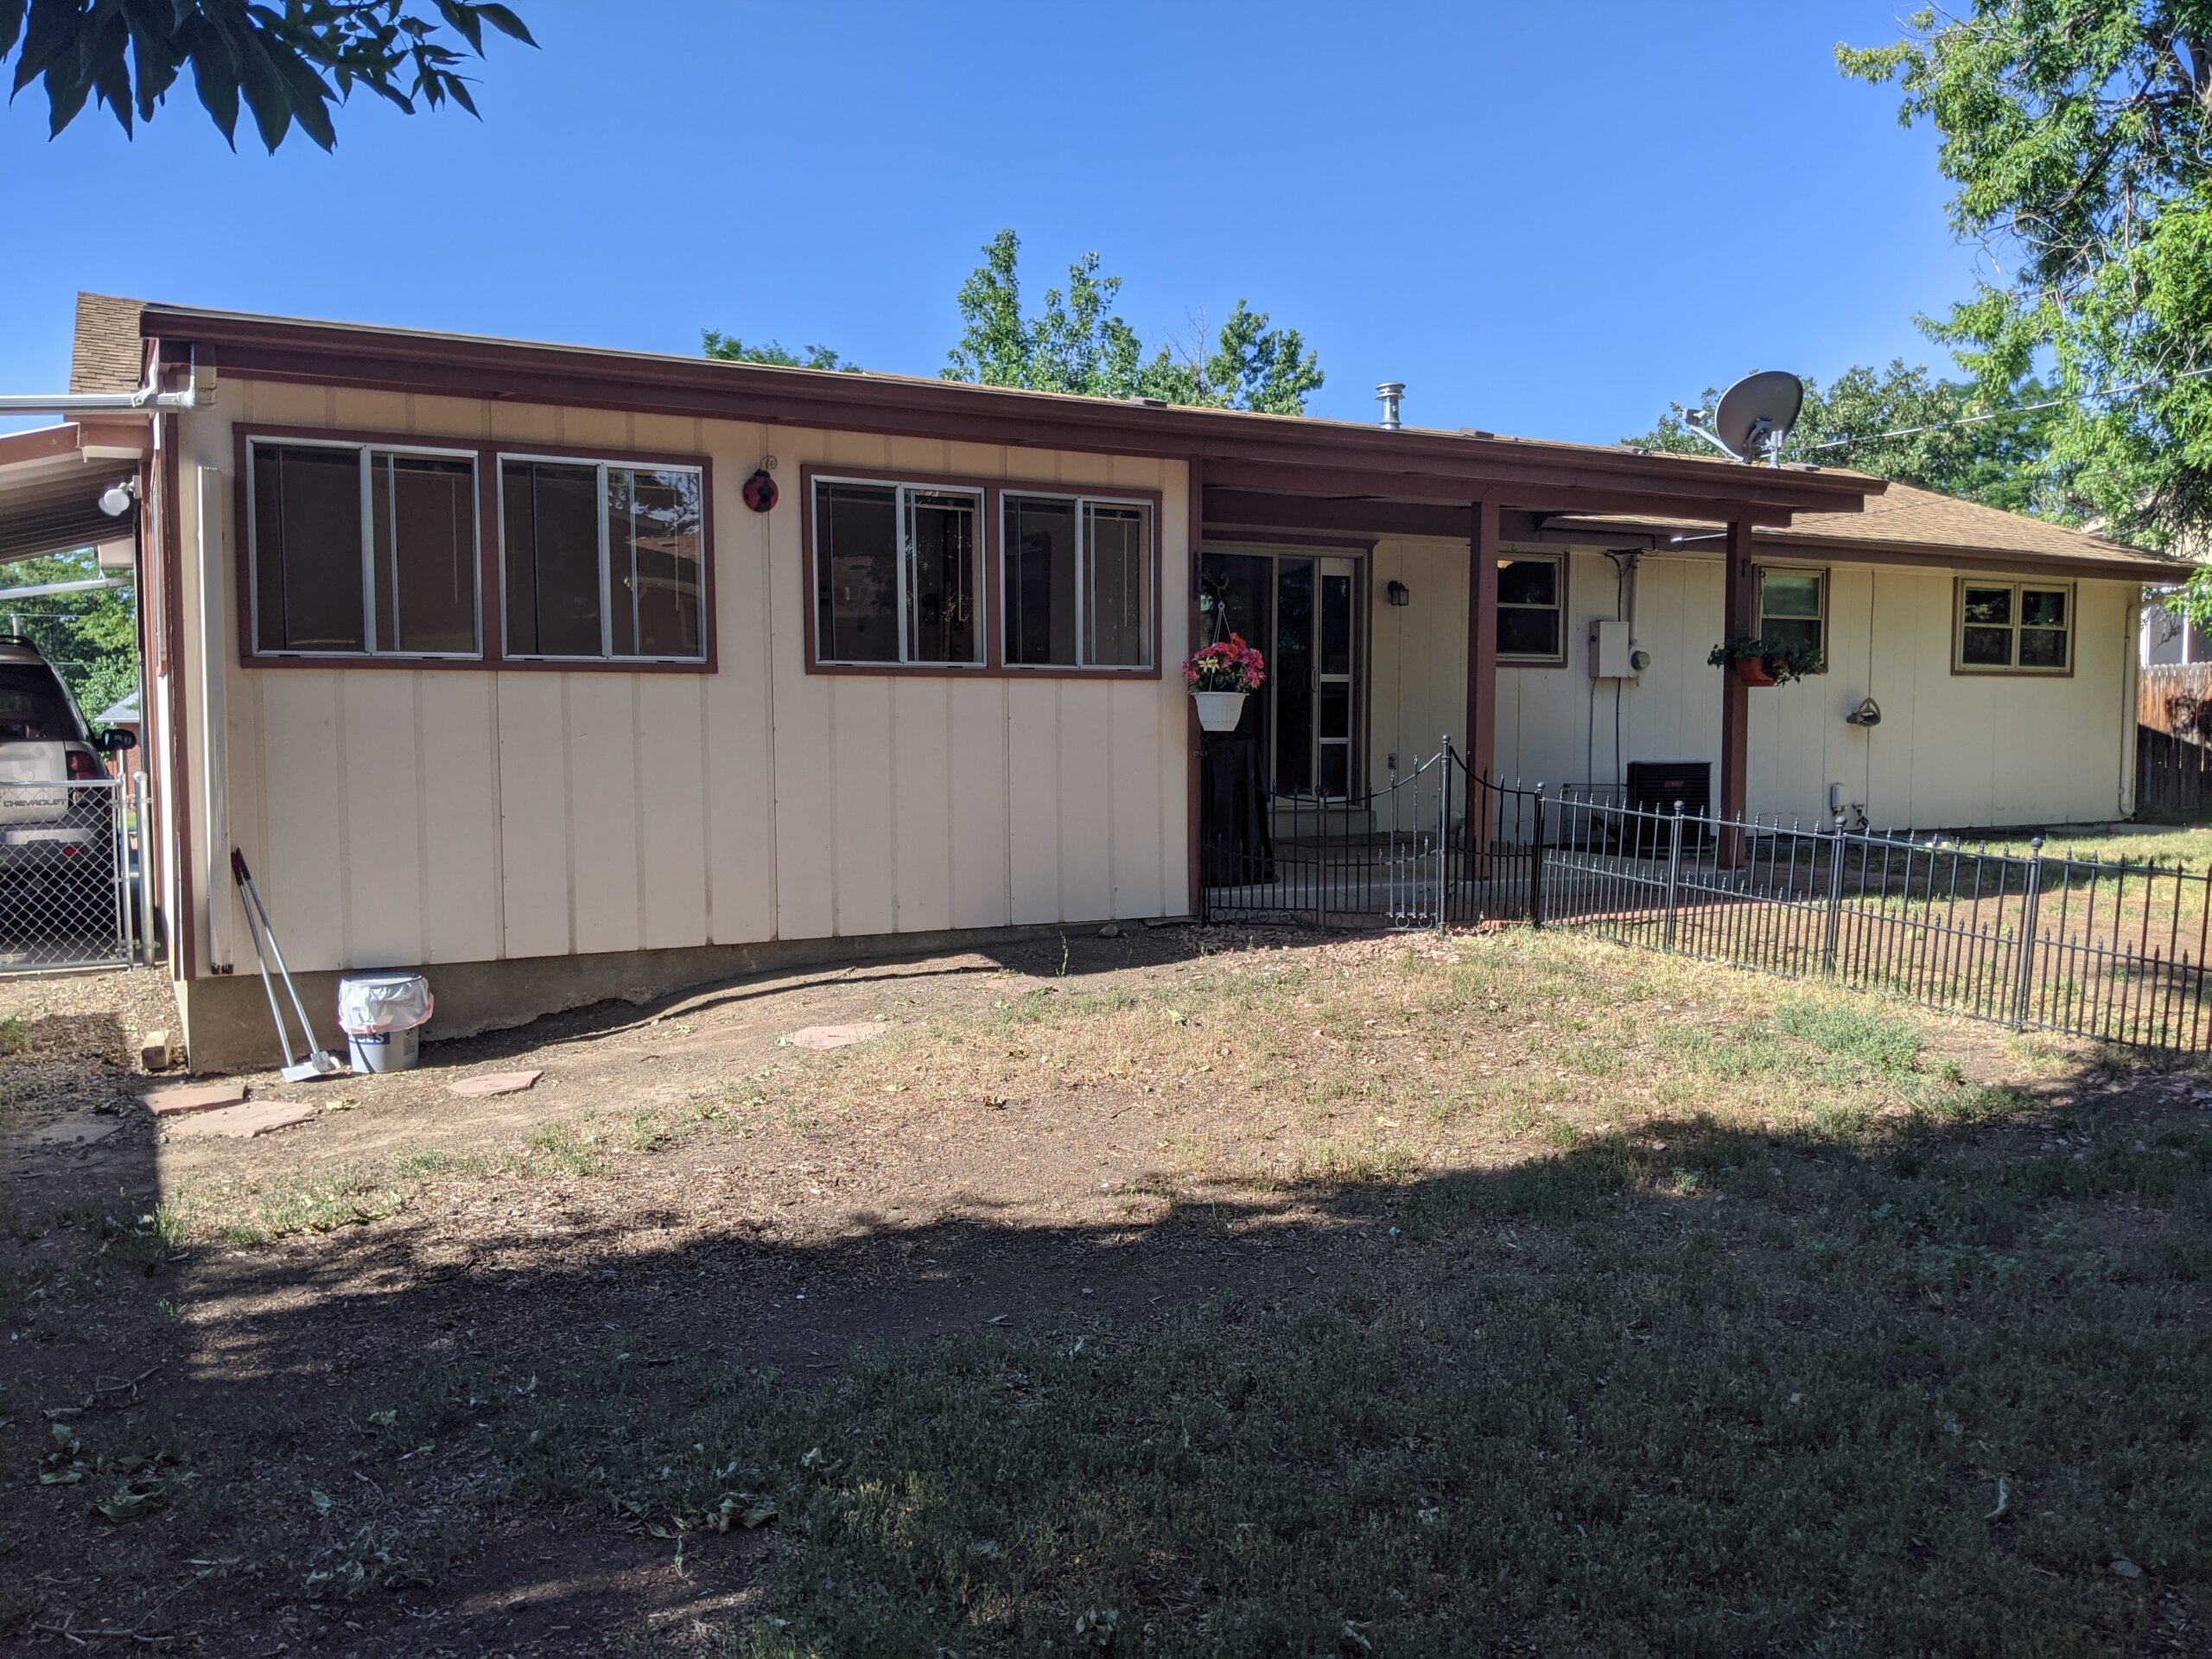 The house was in good condition for being almost 50-years-old but the seller's dogs had beaten up the grass in the backyard. We see potential for several upgrades to the living space back here.